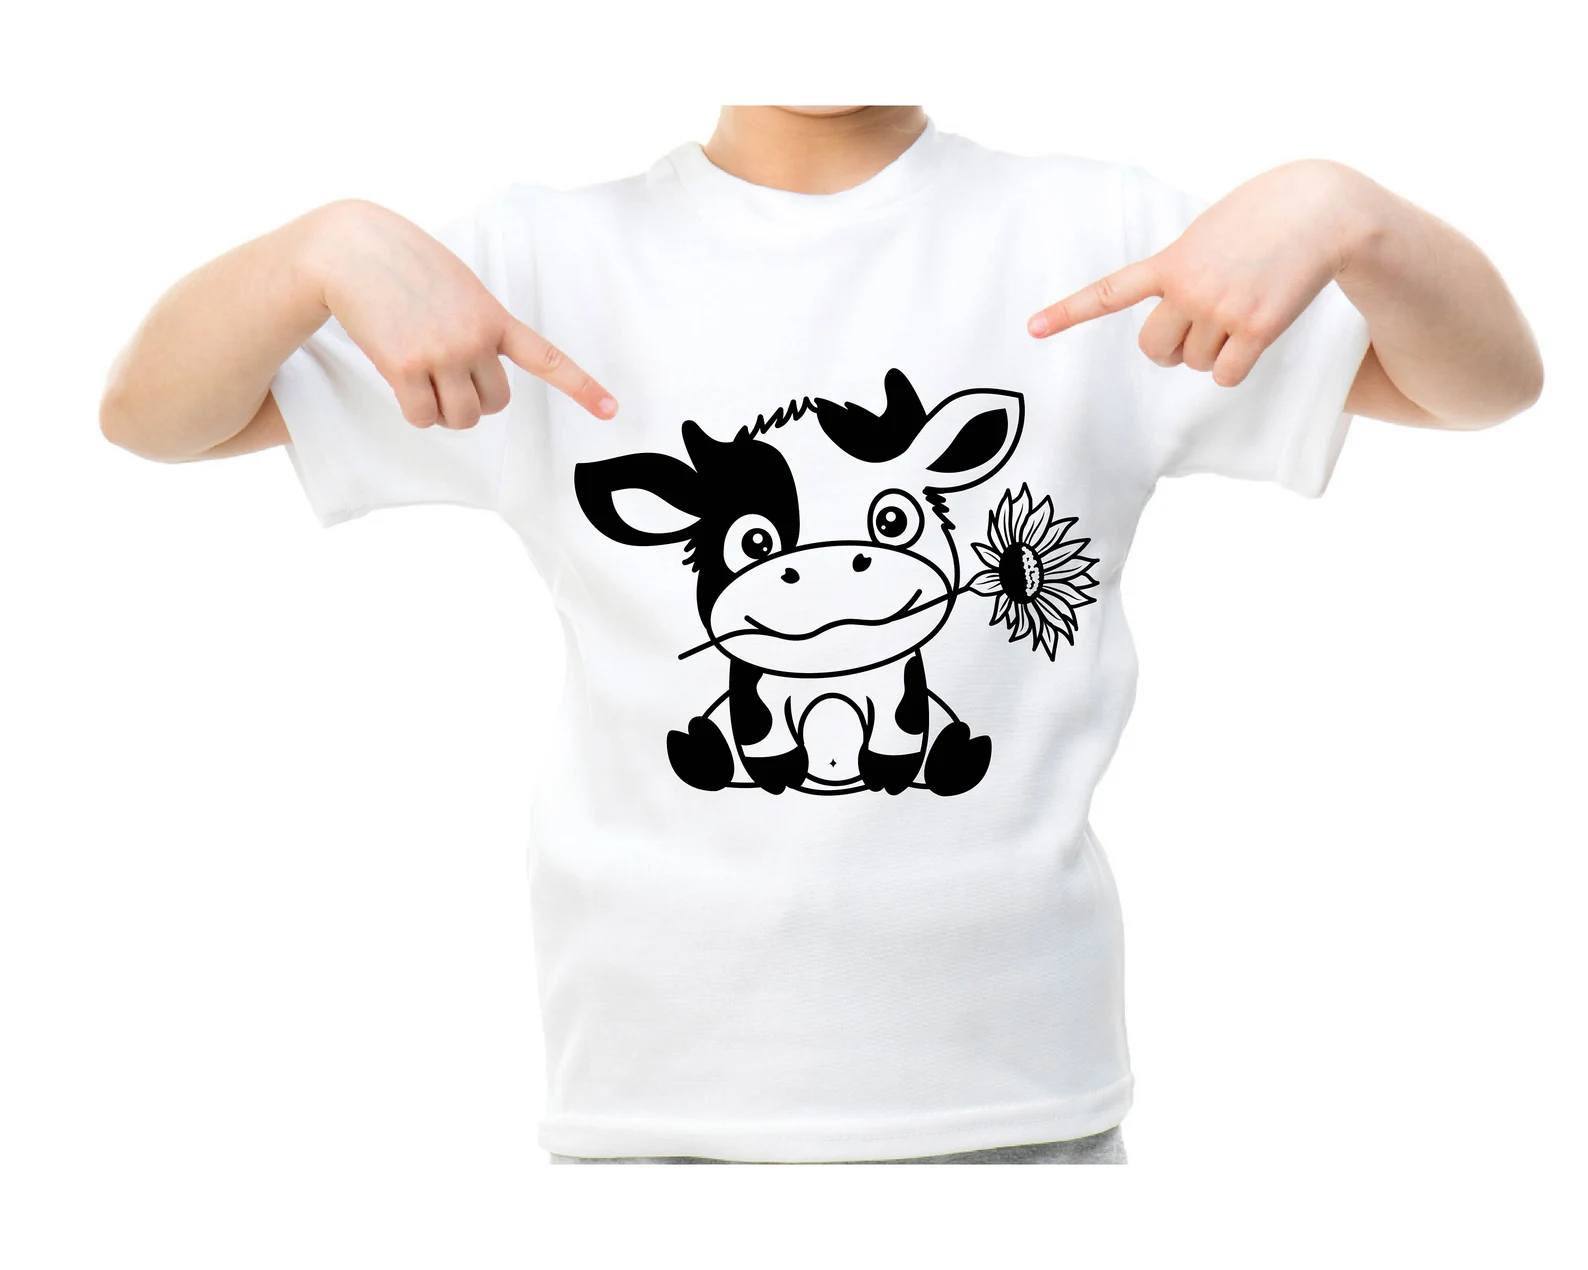 Young boy wearing a white t - shirt with a cartoon cow on it.